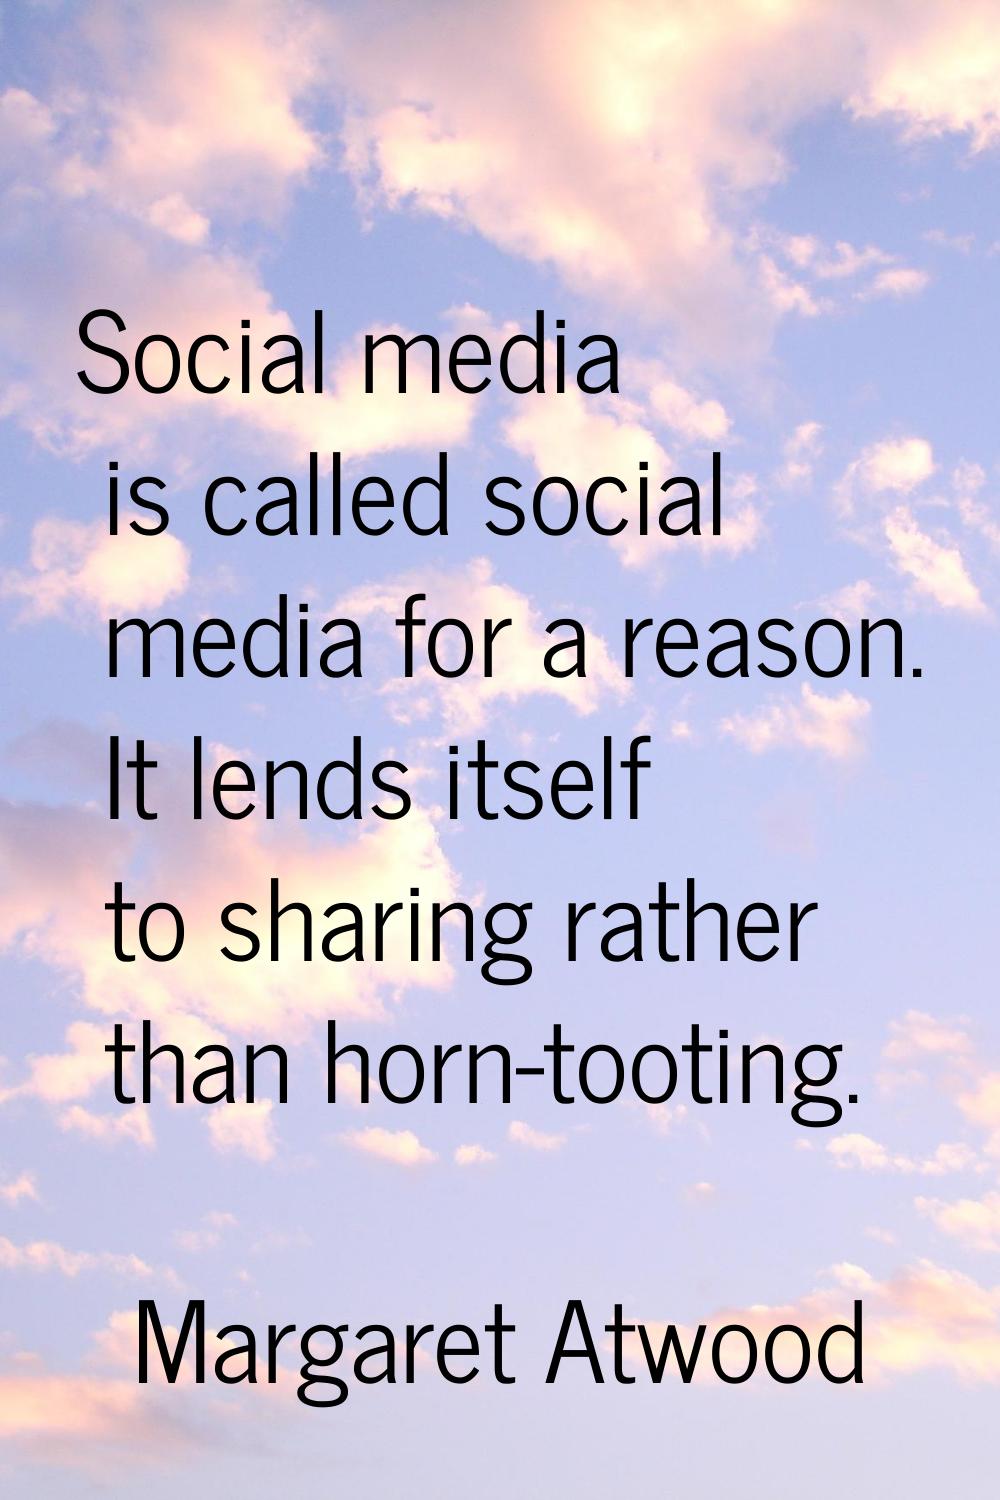 Social media is called social media for a reason. It lends itself to sharing rather than horn-tooti